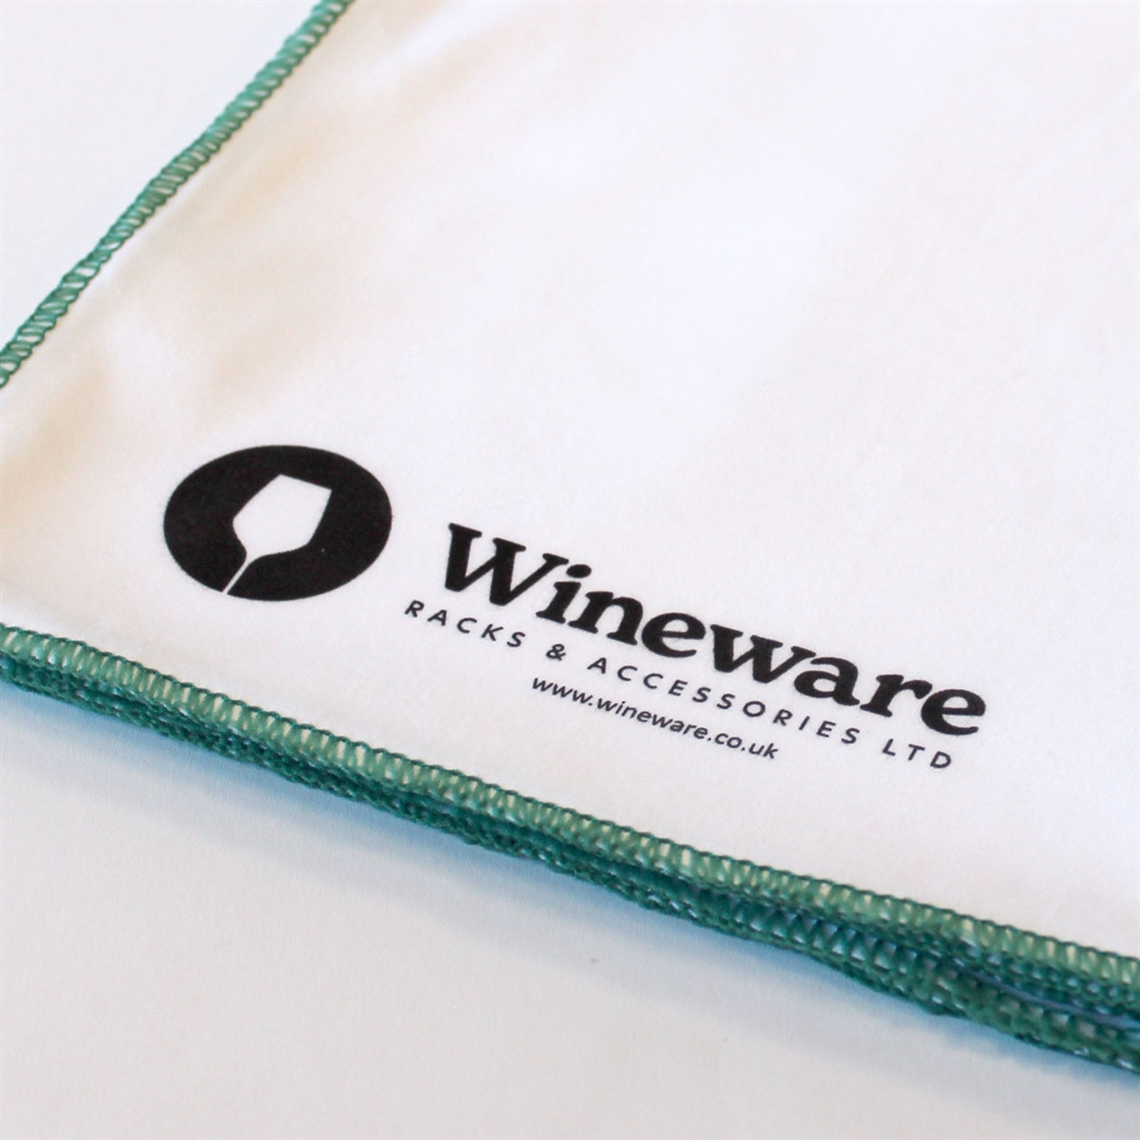 View more wine serving accessories from our Wine Decanter Cleaning range